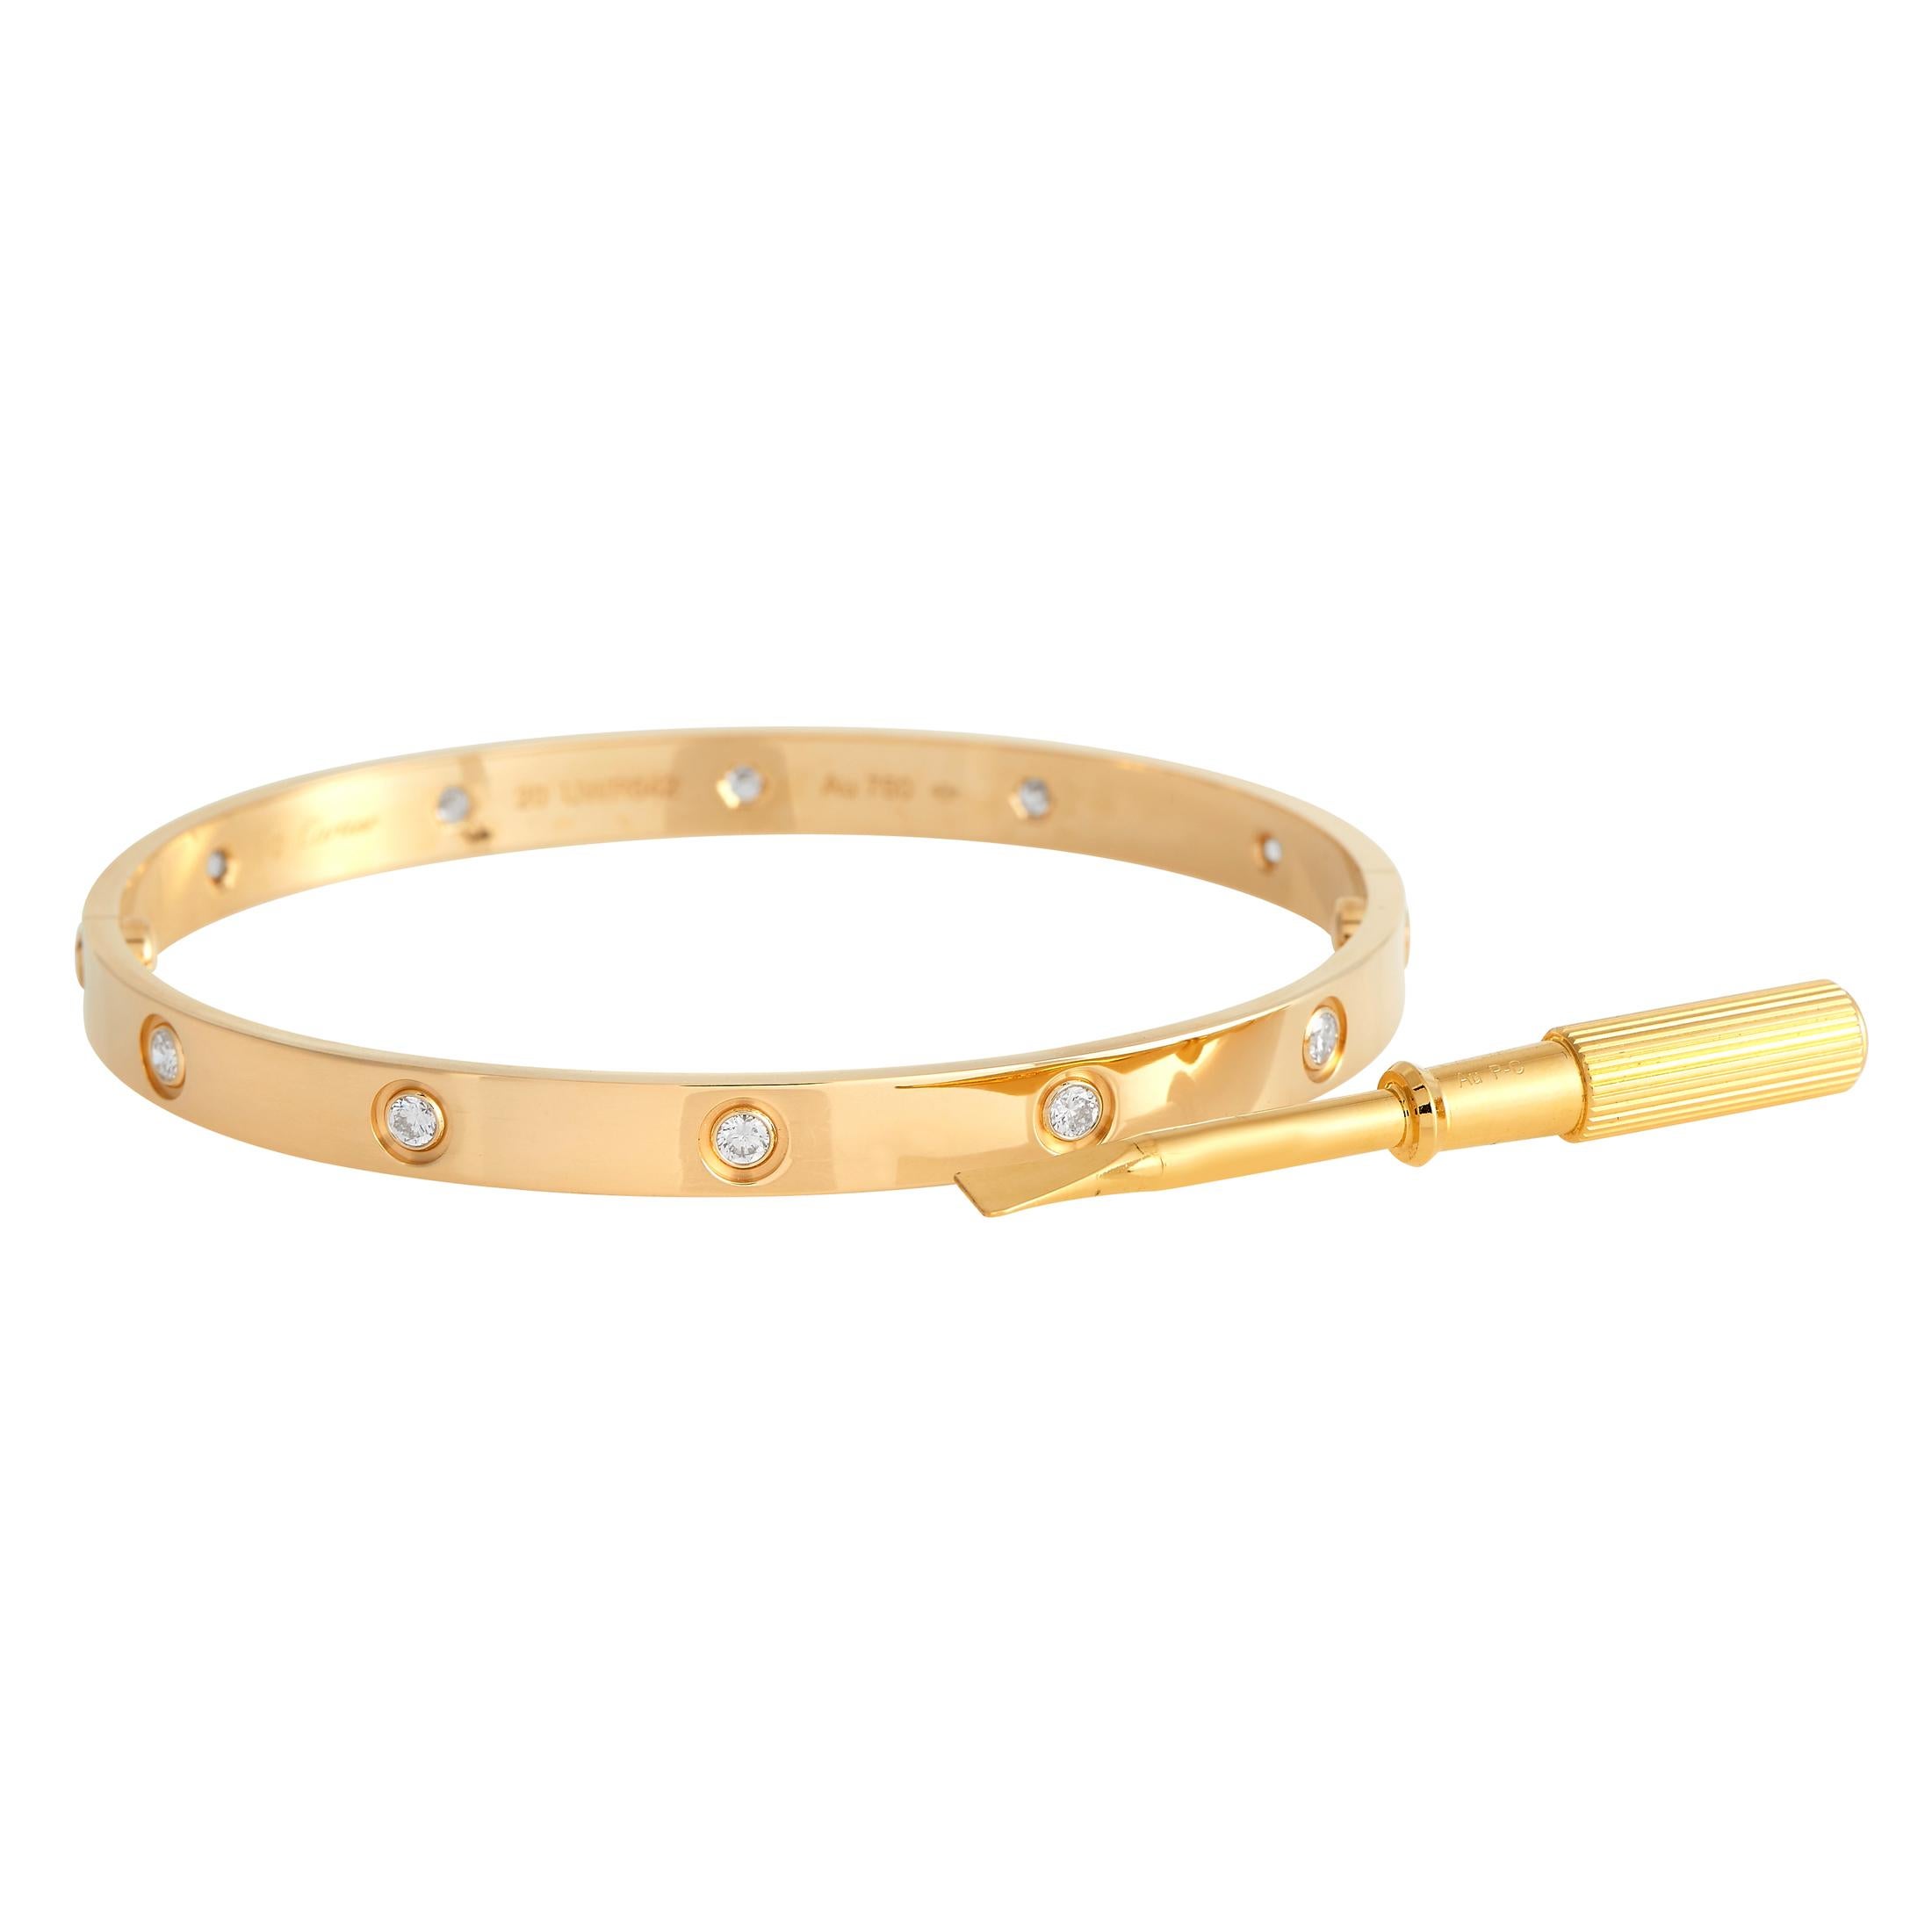 Easy-to-wear, symbolic, and versatile, there's no reason not to have the Cartier LOVE bracelet on your wrist. This fashion favorite features a rigid, close-fitting bracelet that requires a screwdriver to put on and take off. The unique closure